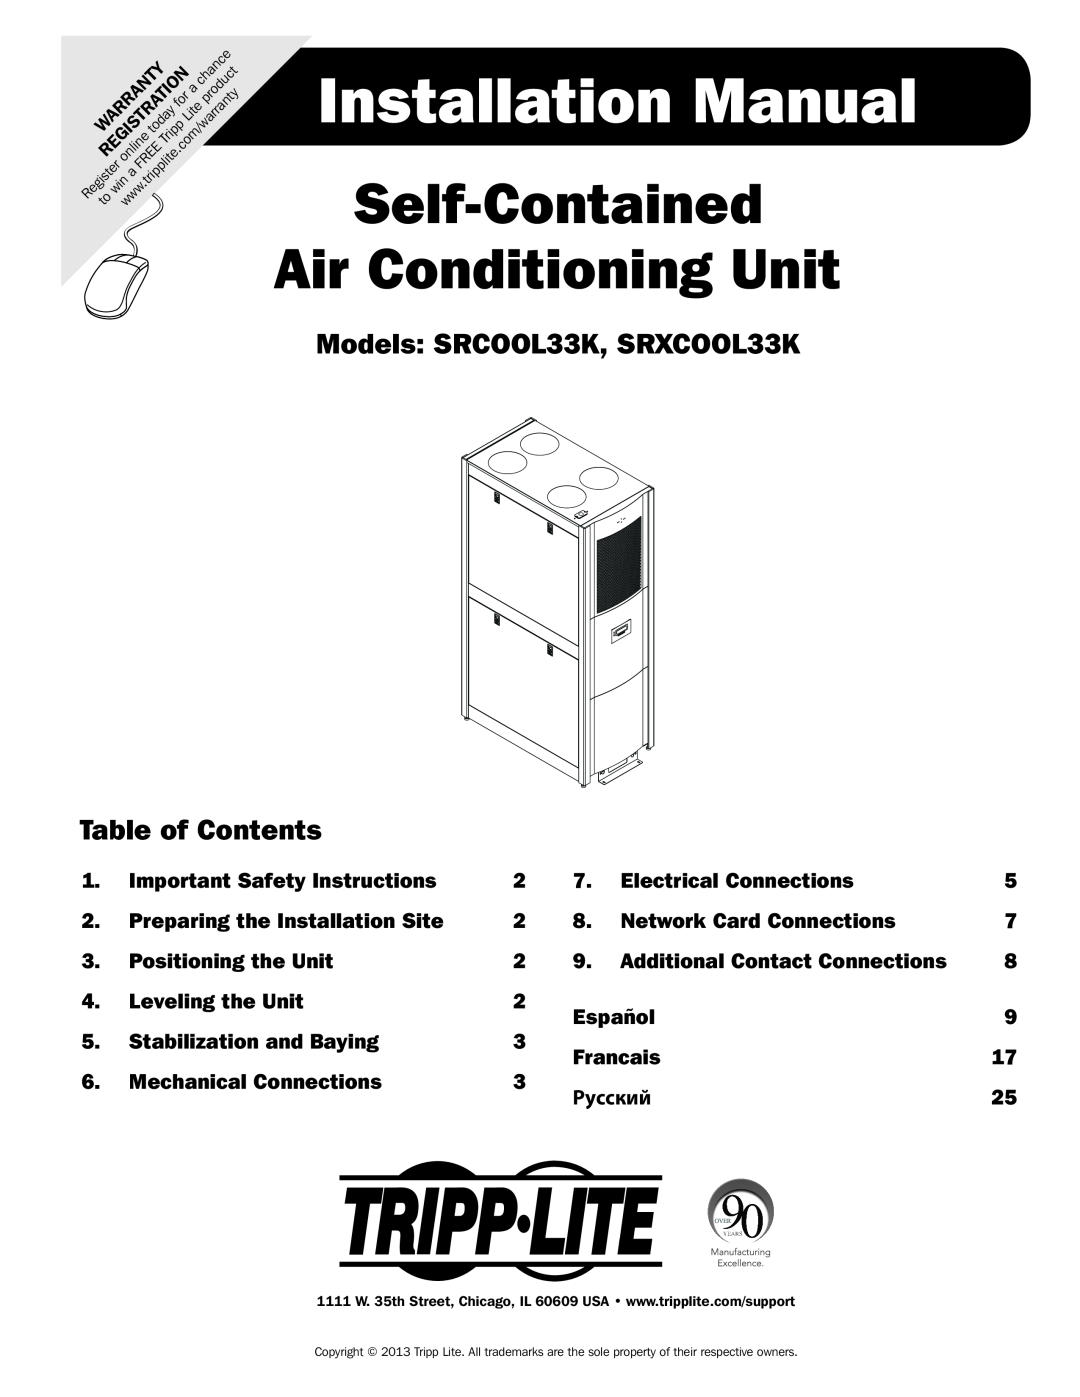 Tripp Lite SRCOOL33K installation manual Installation Manual, Self-Contained Air Conditioning Unit, Table of Contents 